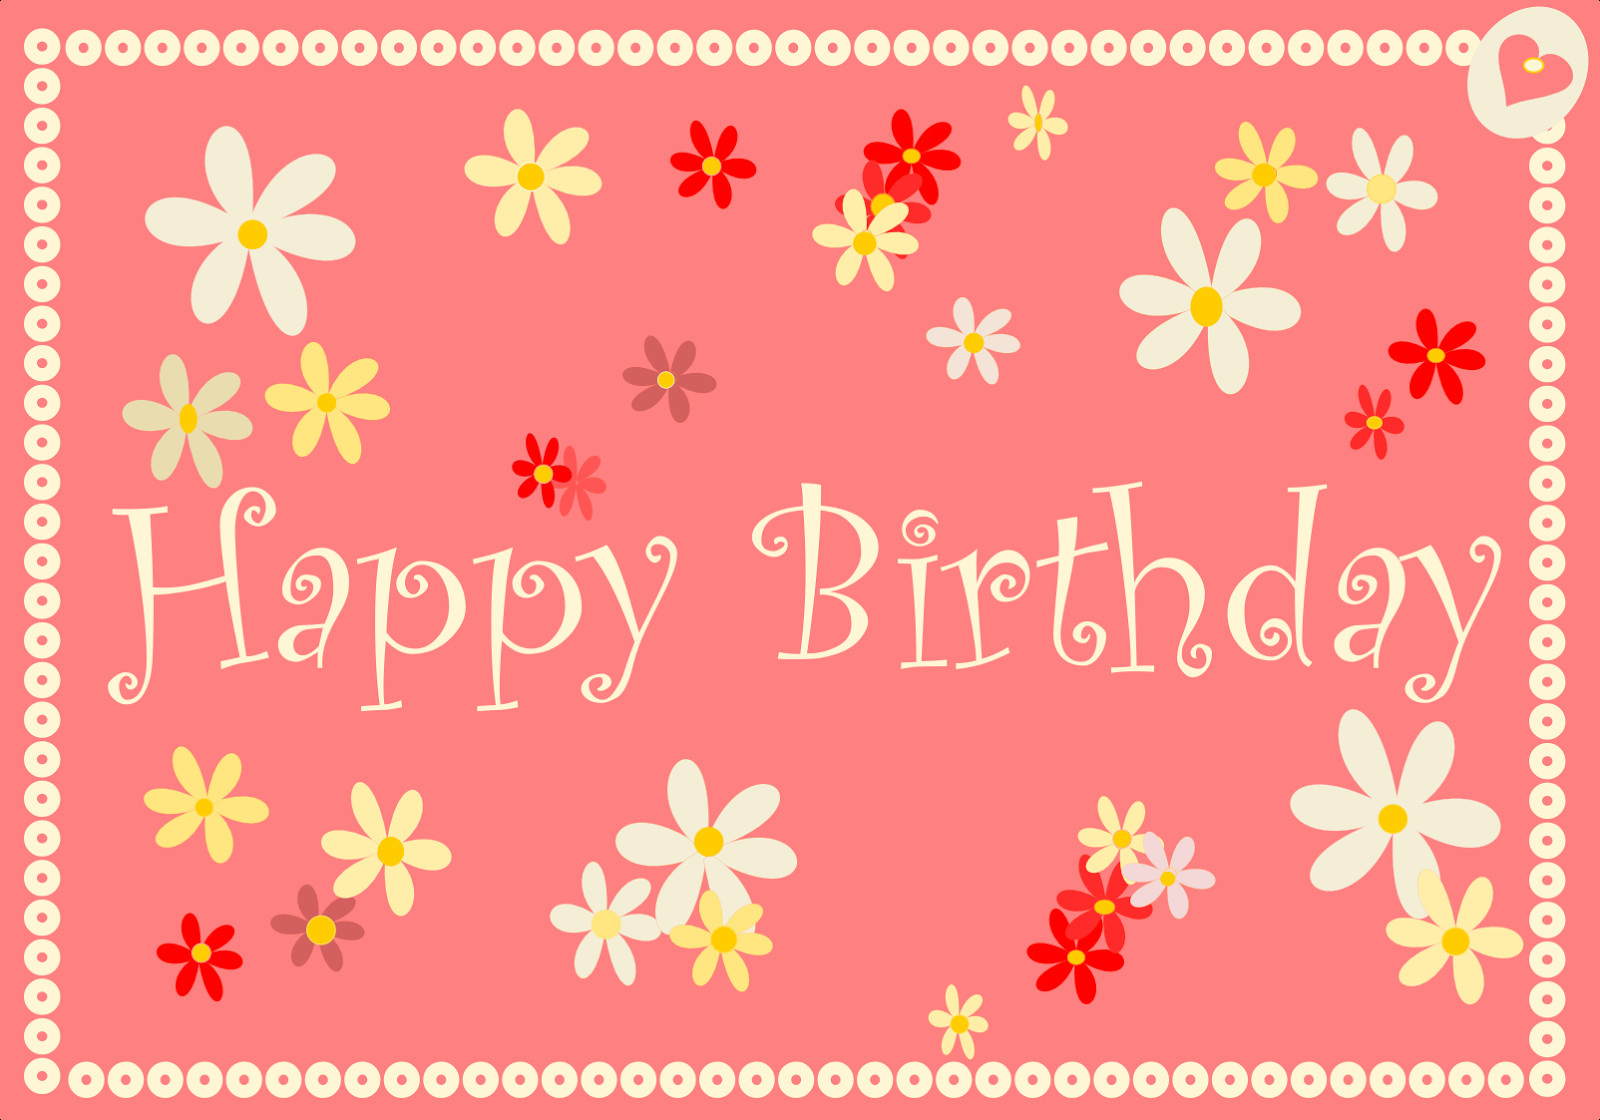 Free Download Birthday Cards
 35 Happy Birthday Cards Free To Download – The WoW Style